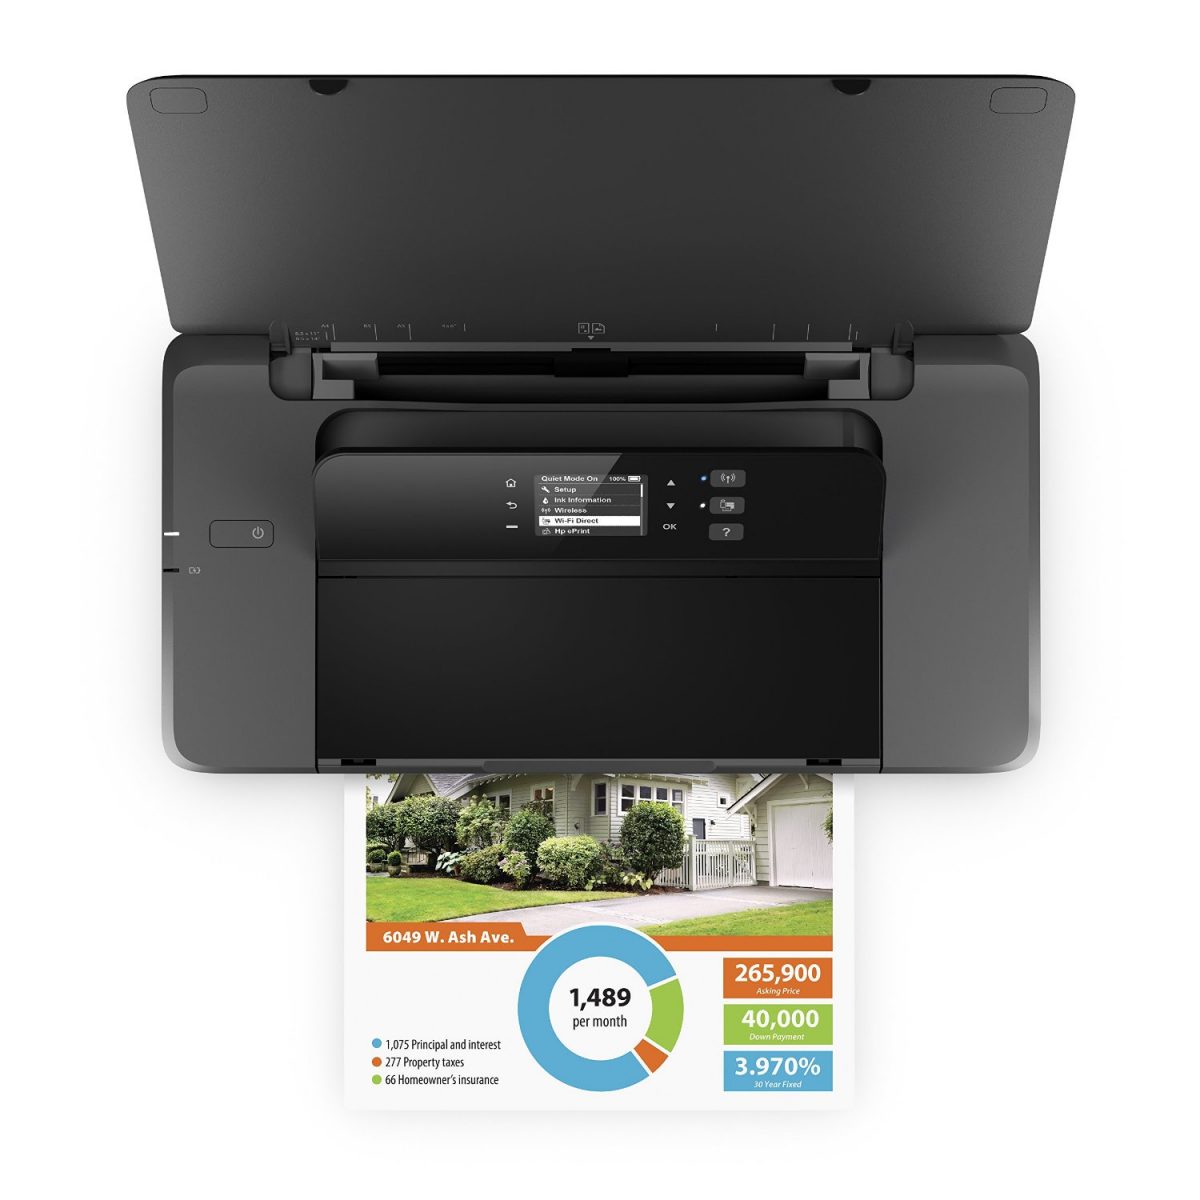 HP OfficeJet 200 Mobile Printer Truly Delivers a Mobile ...